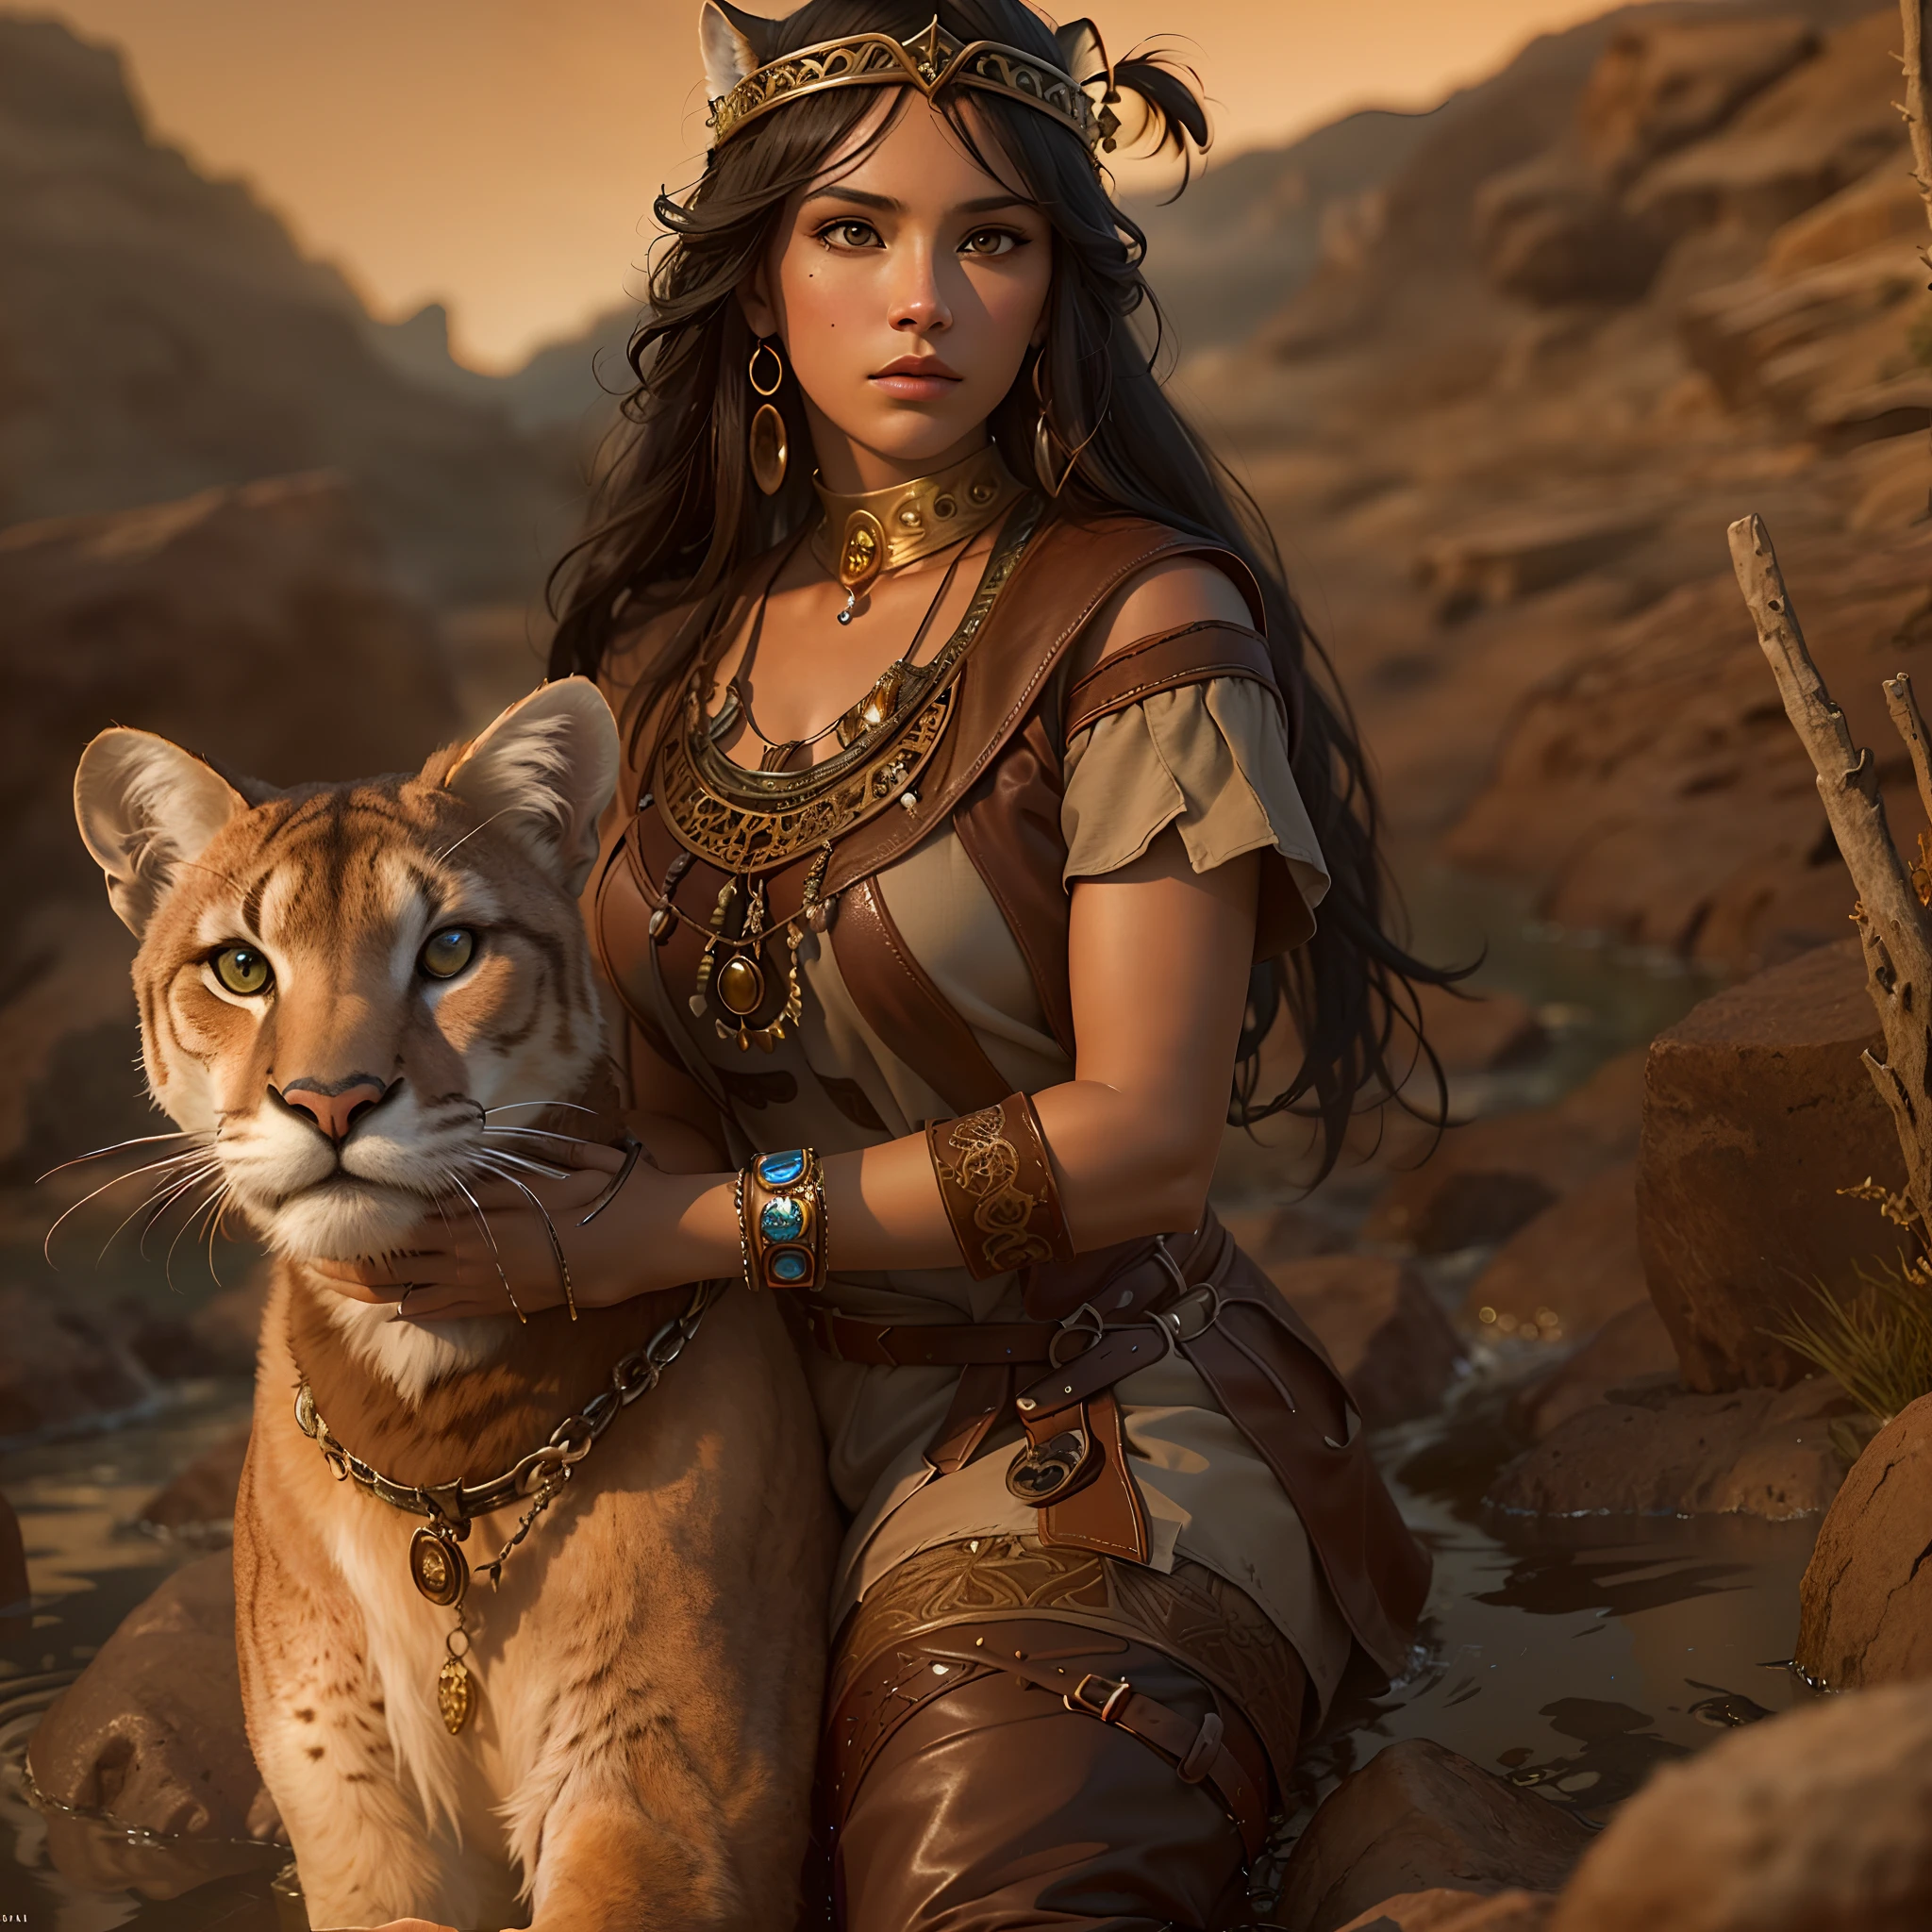 High details, Best quality, 8K, [Ultra detailed], Masterpiece, Best quality, (Extremely detailed), Dynamic Angle, super wide shot, primitive, Photorealistic, Fantasy art, dnd art, RPG art, Realistic art, Wide-angle picture of a female human druid and her pet cougar, Priest of Nature, Nature clergy, full bodyesbian, [[Anatomically correct]]. Kneeling woman (1.5 intricate details, Masterpiece, Best quality) Talk to desert mountain lions (1.6 intricate details, Masterpiece, Best quality) in a desert (1.5 intricate details, Masterpiece, Best quality), Women in leather clothing (1.4 intricate details, Masterpiece, Best quality), Leather boots, Thick hair, Long hair, Brown hair, Sepia skin Rich brown eyes, Desert background (intense detail), A stream flowing in an oasis (1.4 intricate details, Masterpiece, Best quality), Night, Moon light, stars (1.4 intricate details, Masterpiece, Best quality), Dynamic Angle, (1.4 intricate details, Masterpiece, Best quality) 3D rendering of, High details, Best quality, A high resolution, ultra-wide-angle